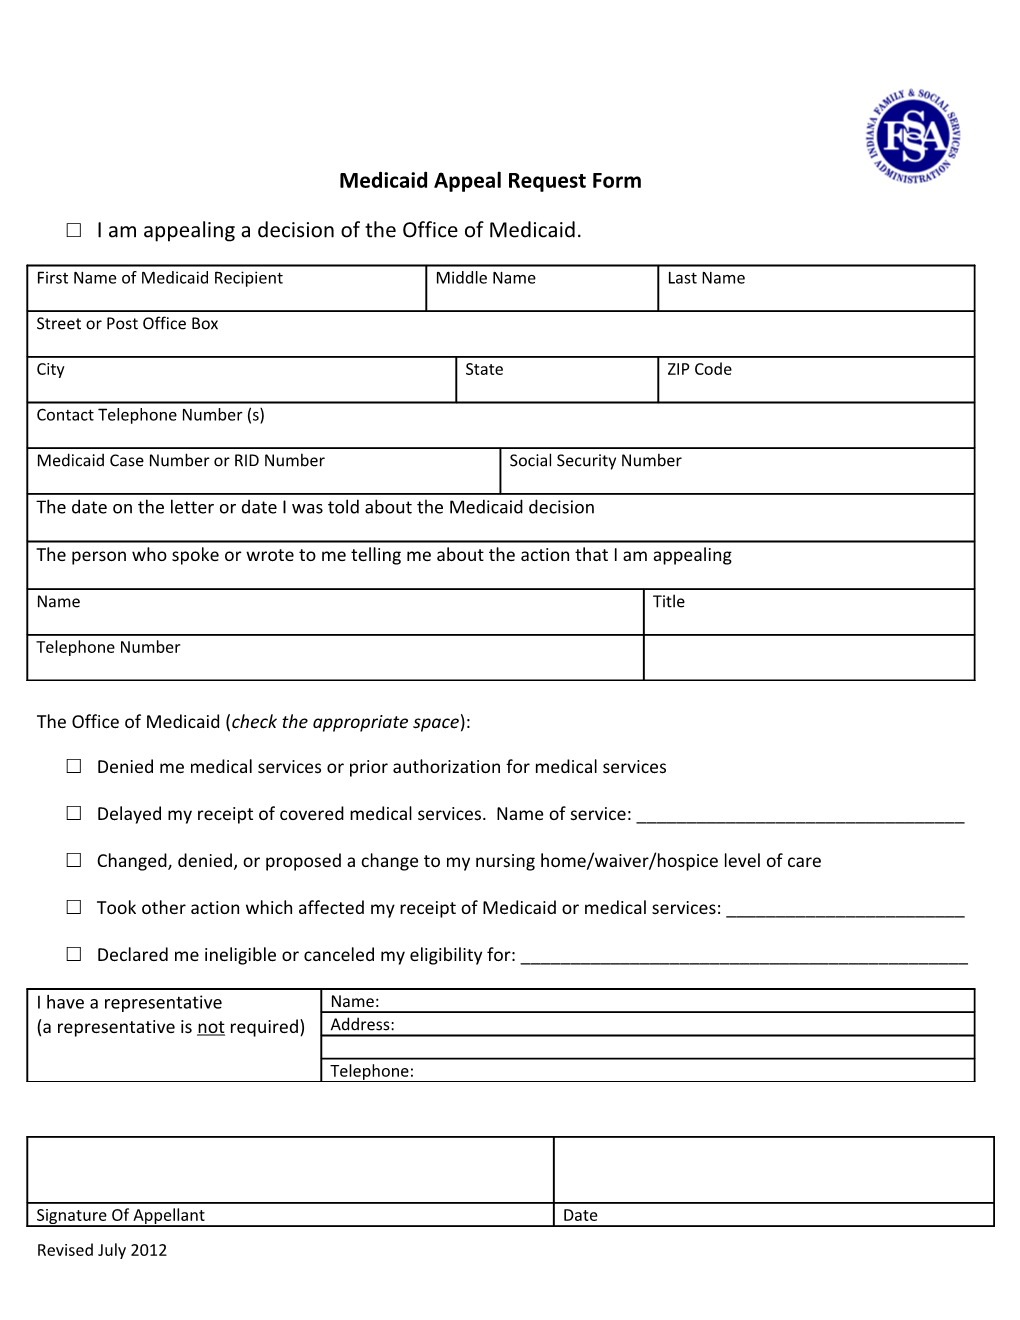 Medicaid Appeal Request Form